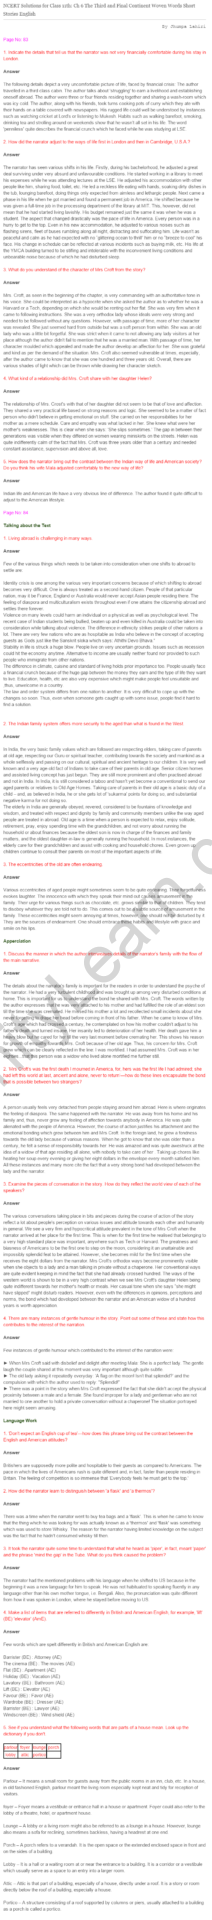 NCERT Solutions For Class 11 English Woven Words The Third and Final Continent